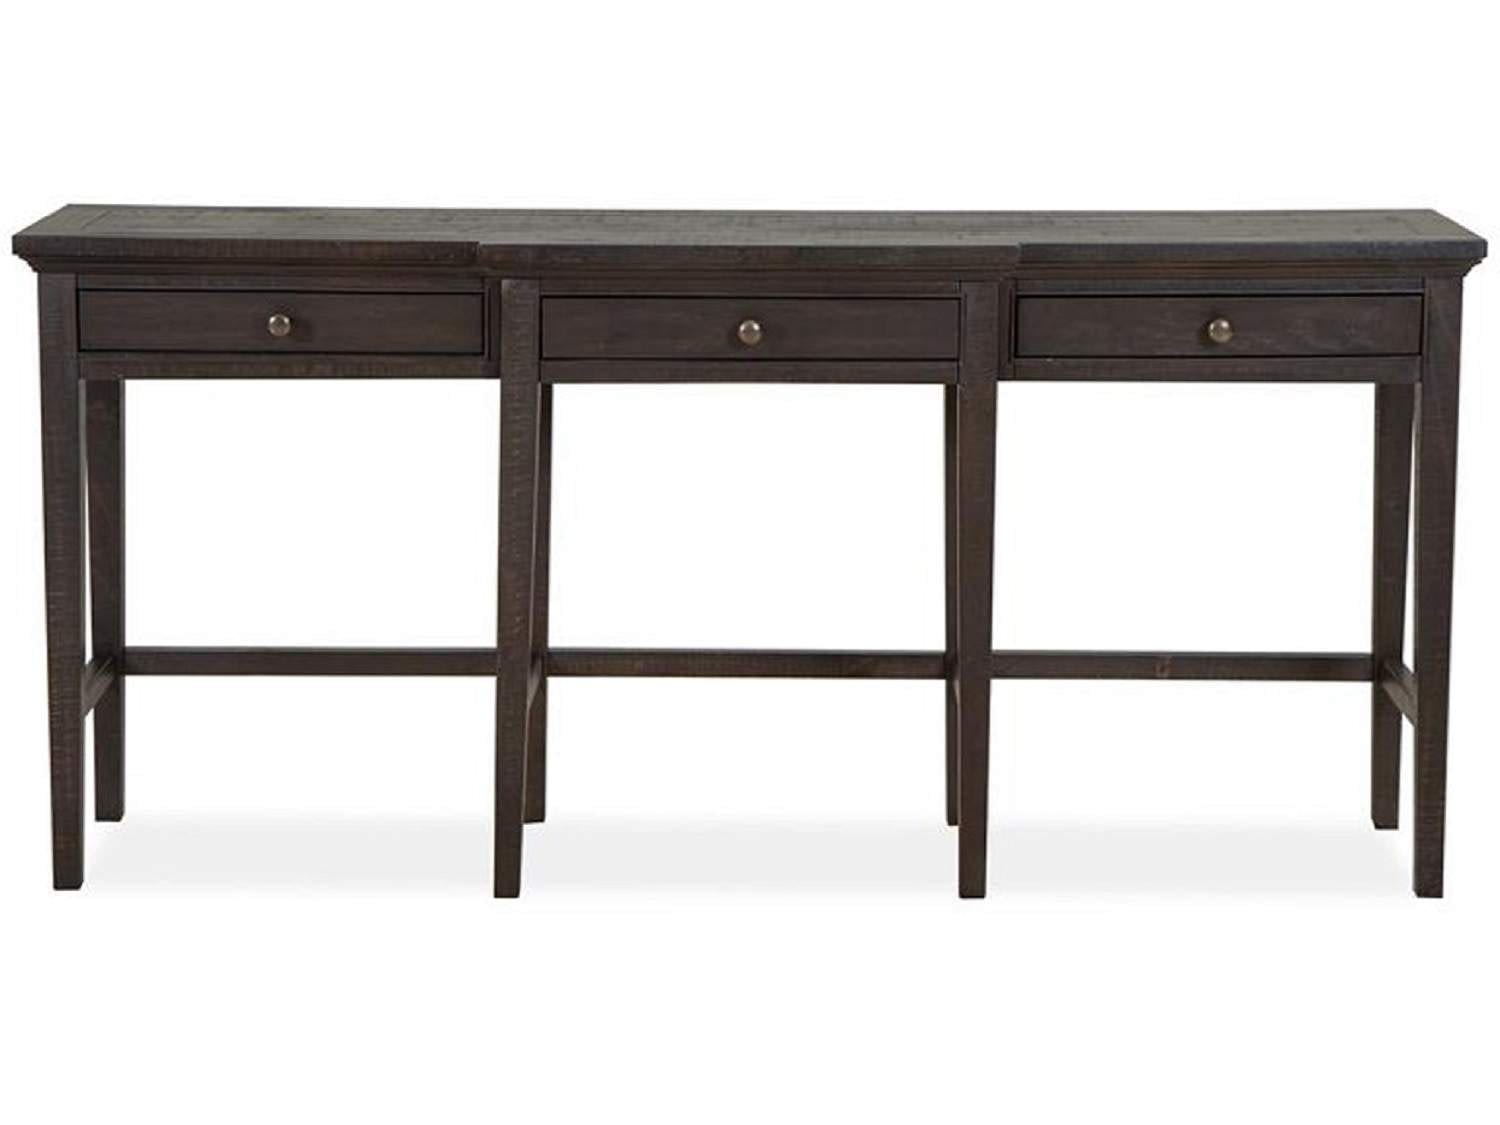 LENORA Console Table - Front